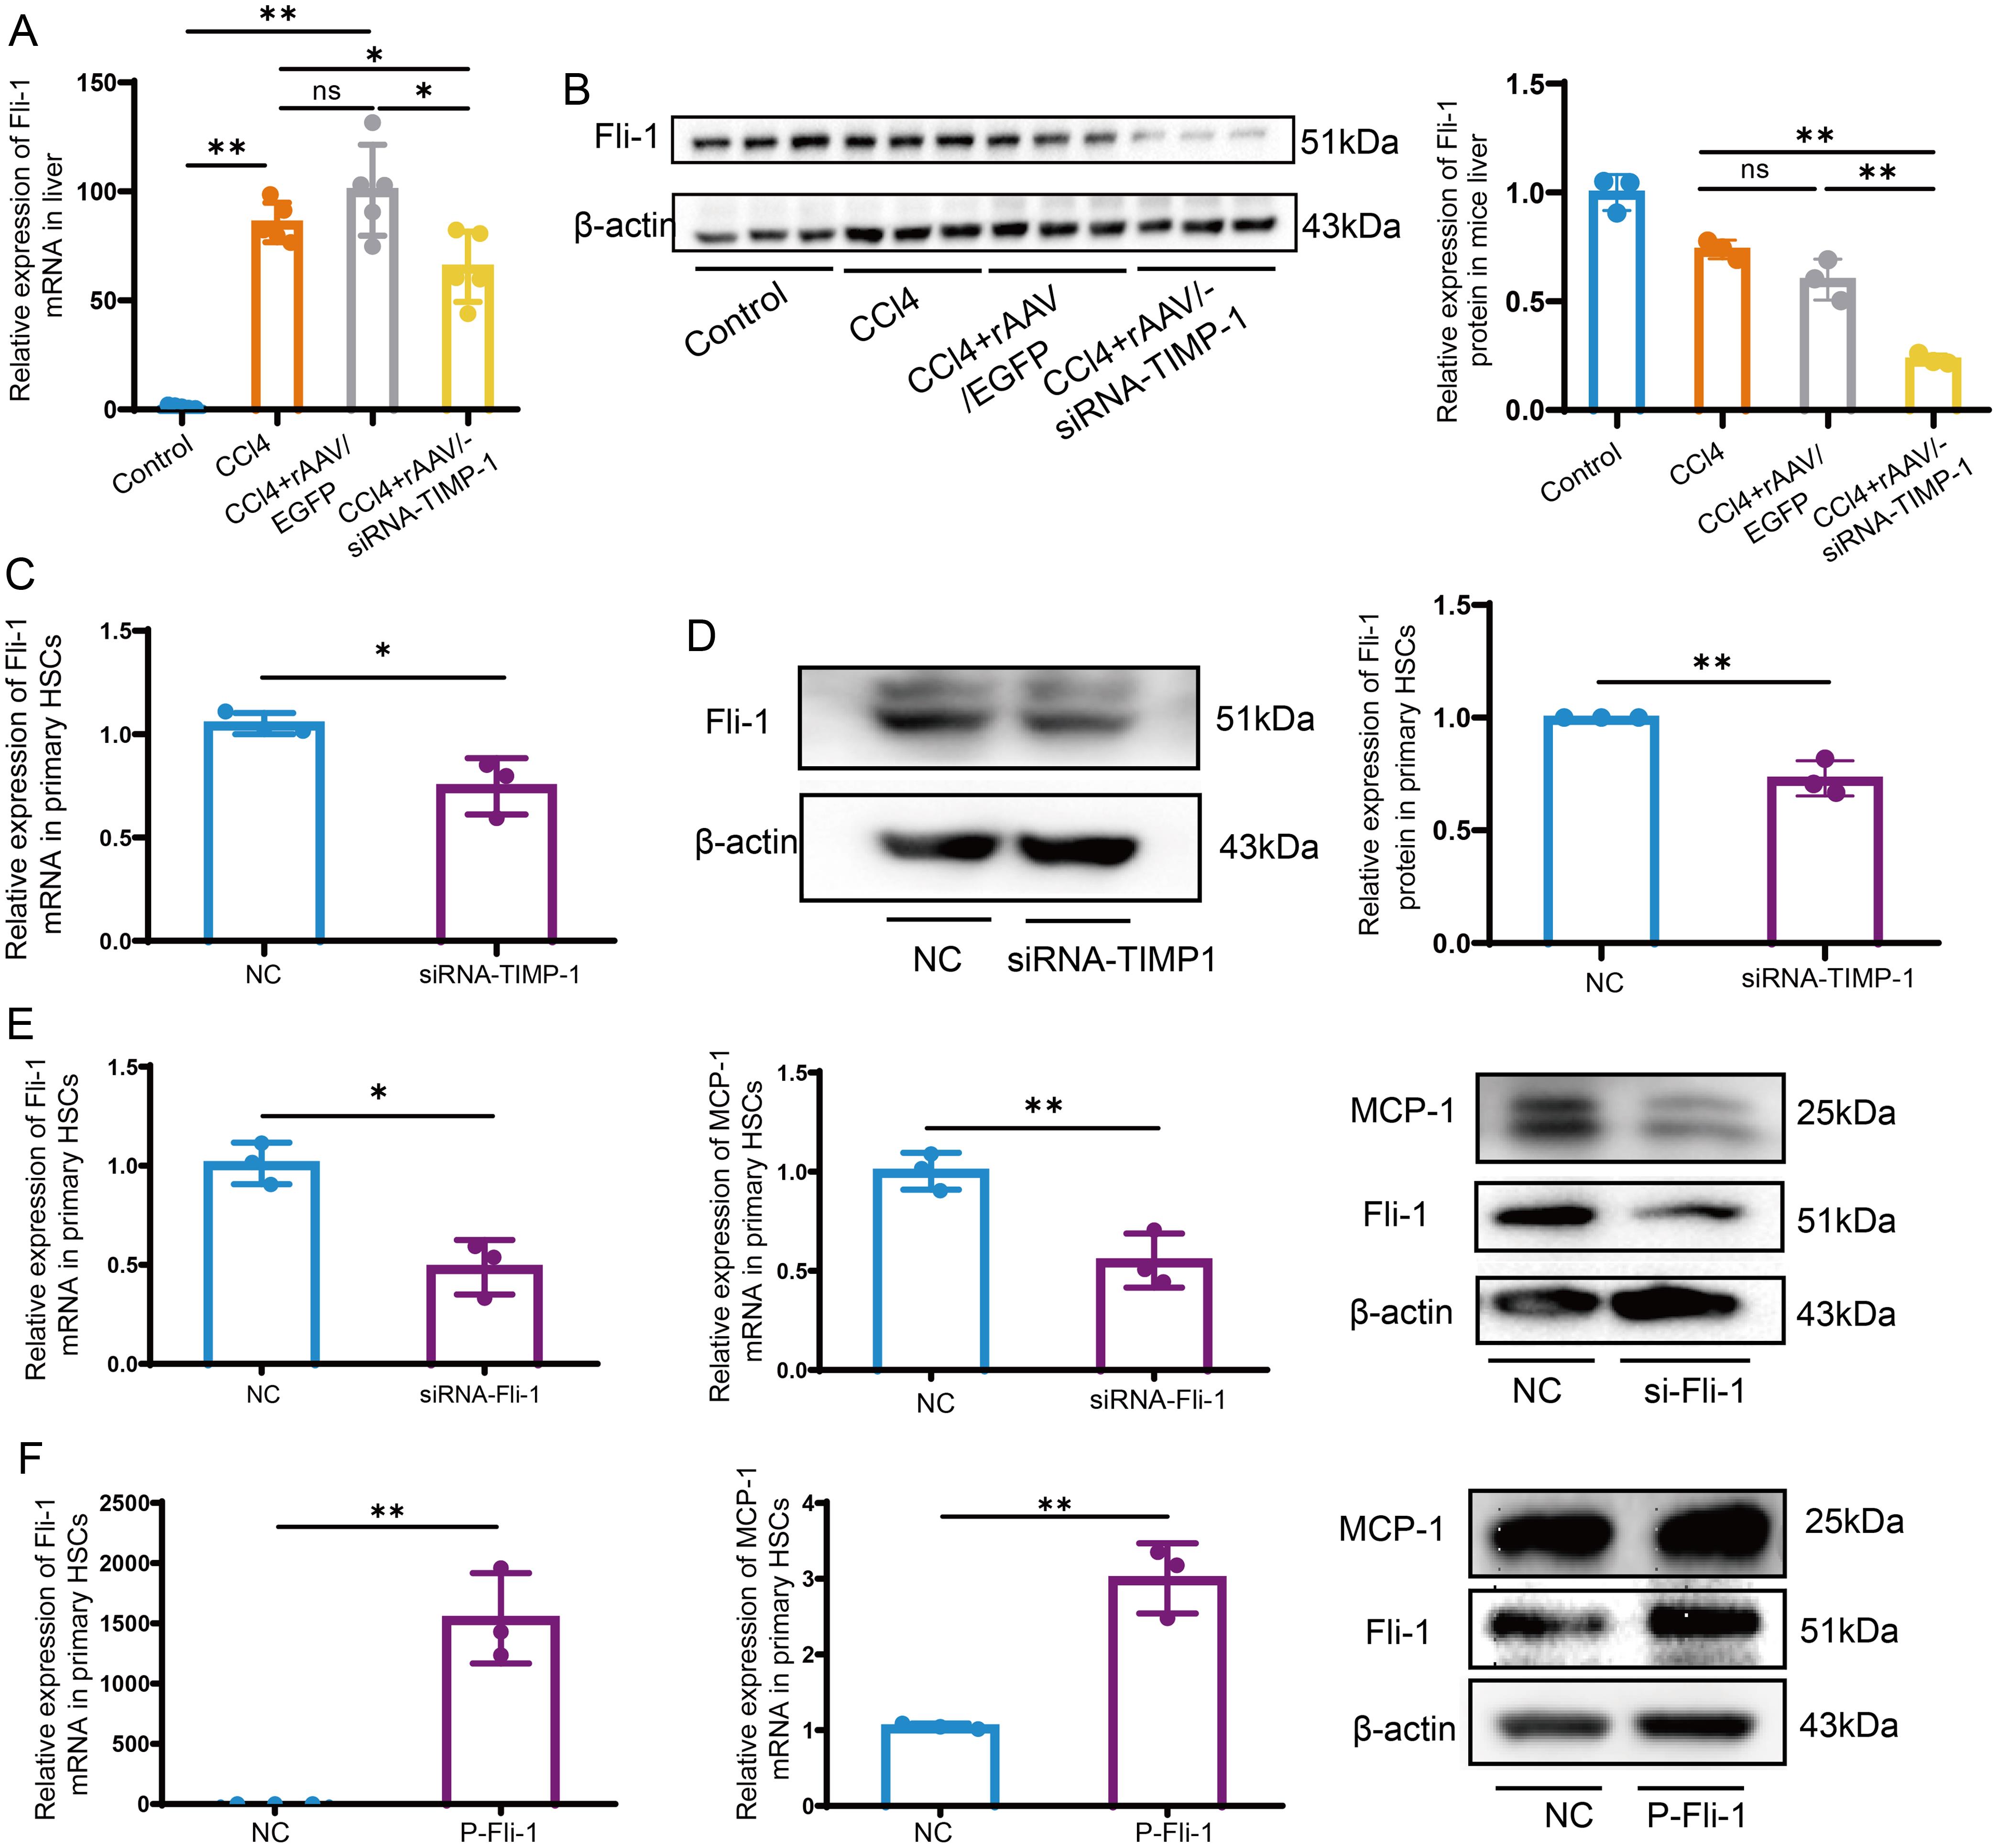 TIMP-1 regulates the expression of MCP-1 via Fli-1 in mice and primary HSCs.